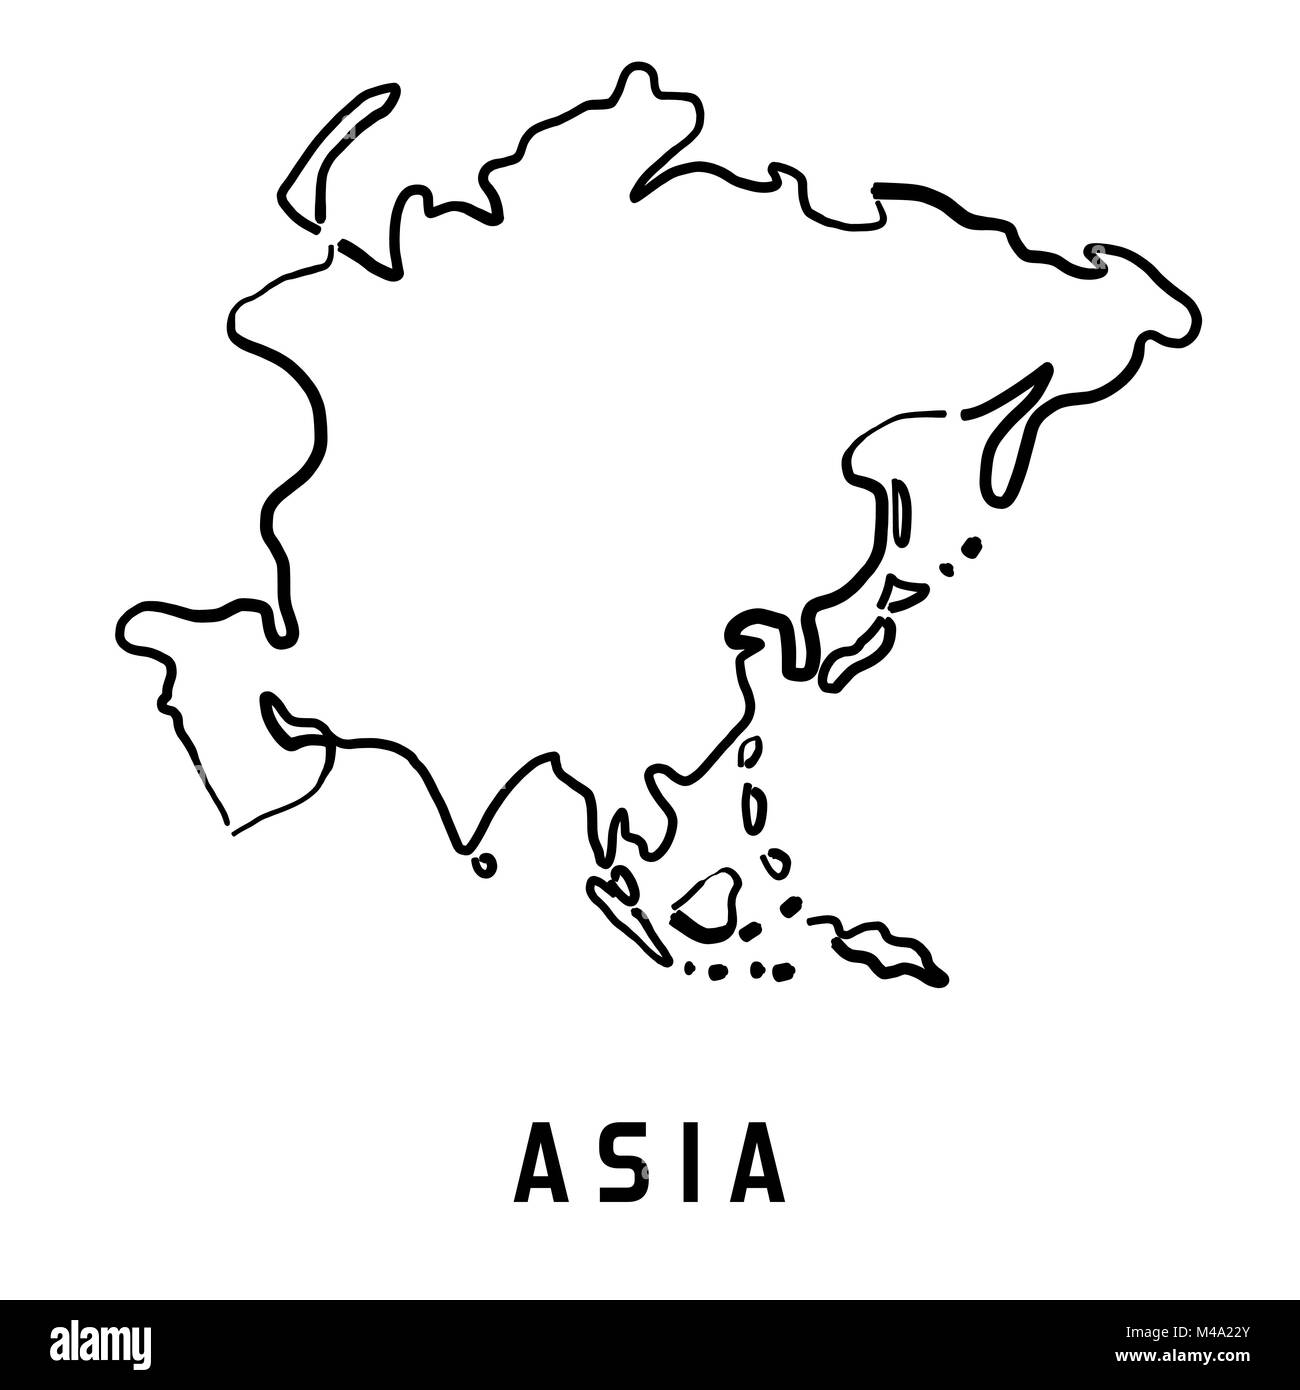 Blank Geography Map Of Asia